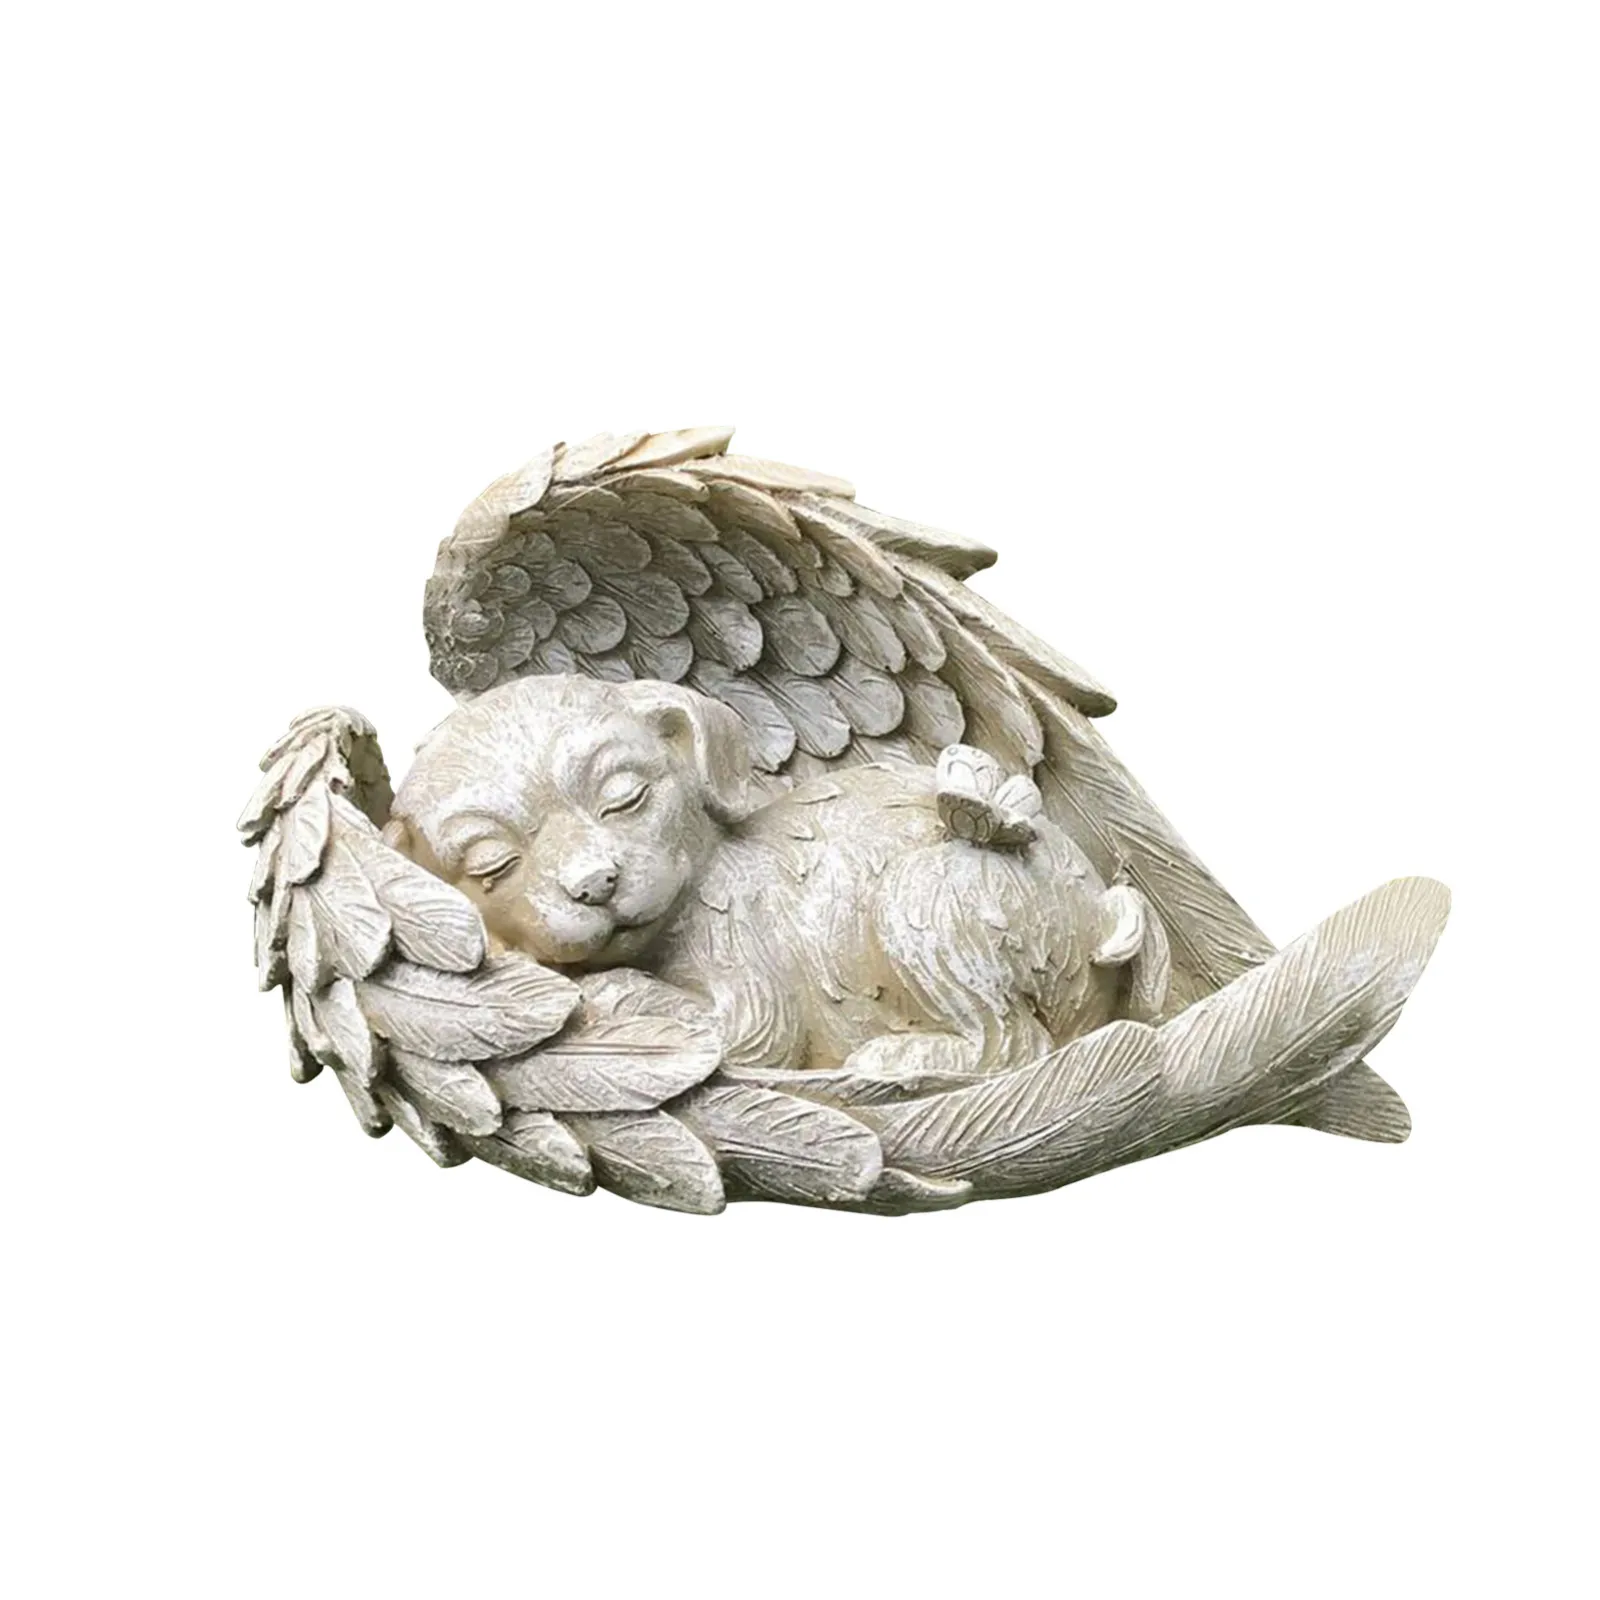 DOG MEMORIAL Sleeping Pet Or Cat With Wing Angel Statue Figurine 12cm Stone with Angel Wings Garden Decor for Outdoor Or Indoor